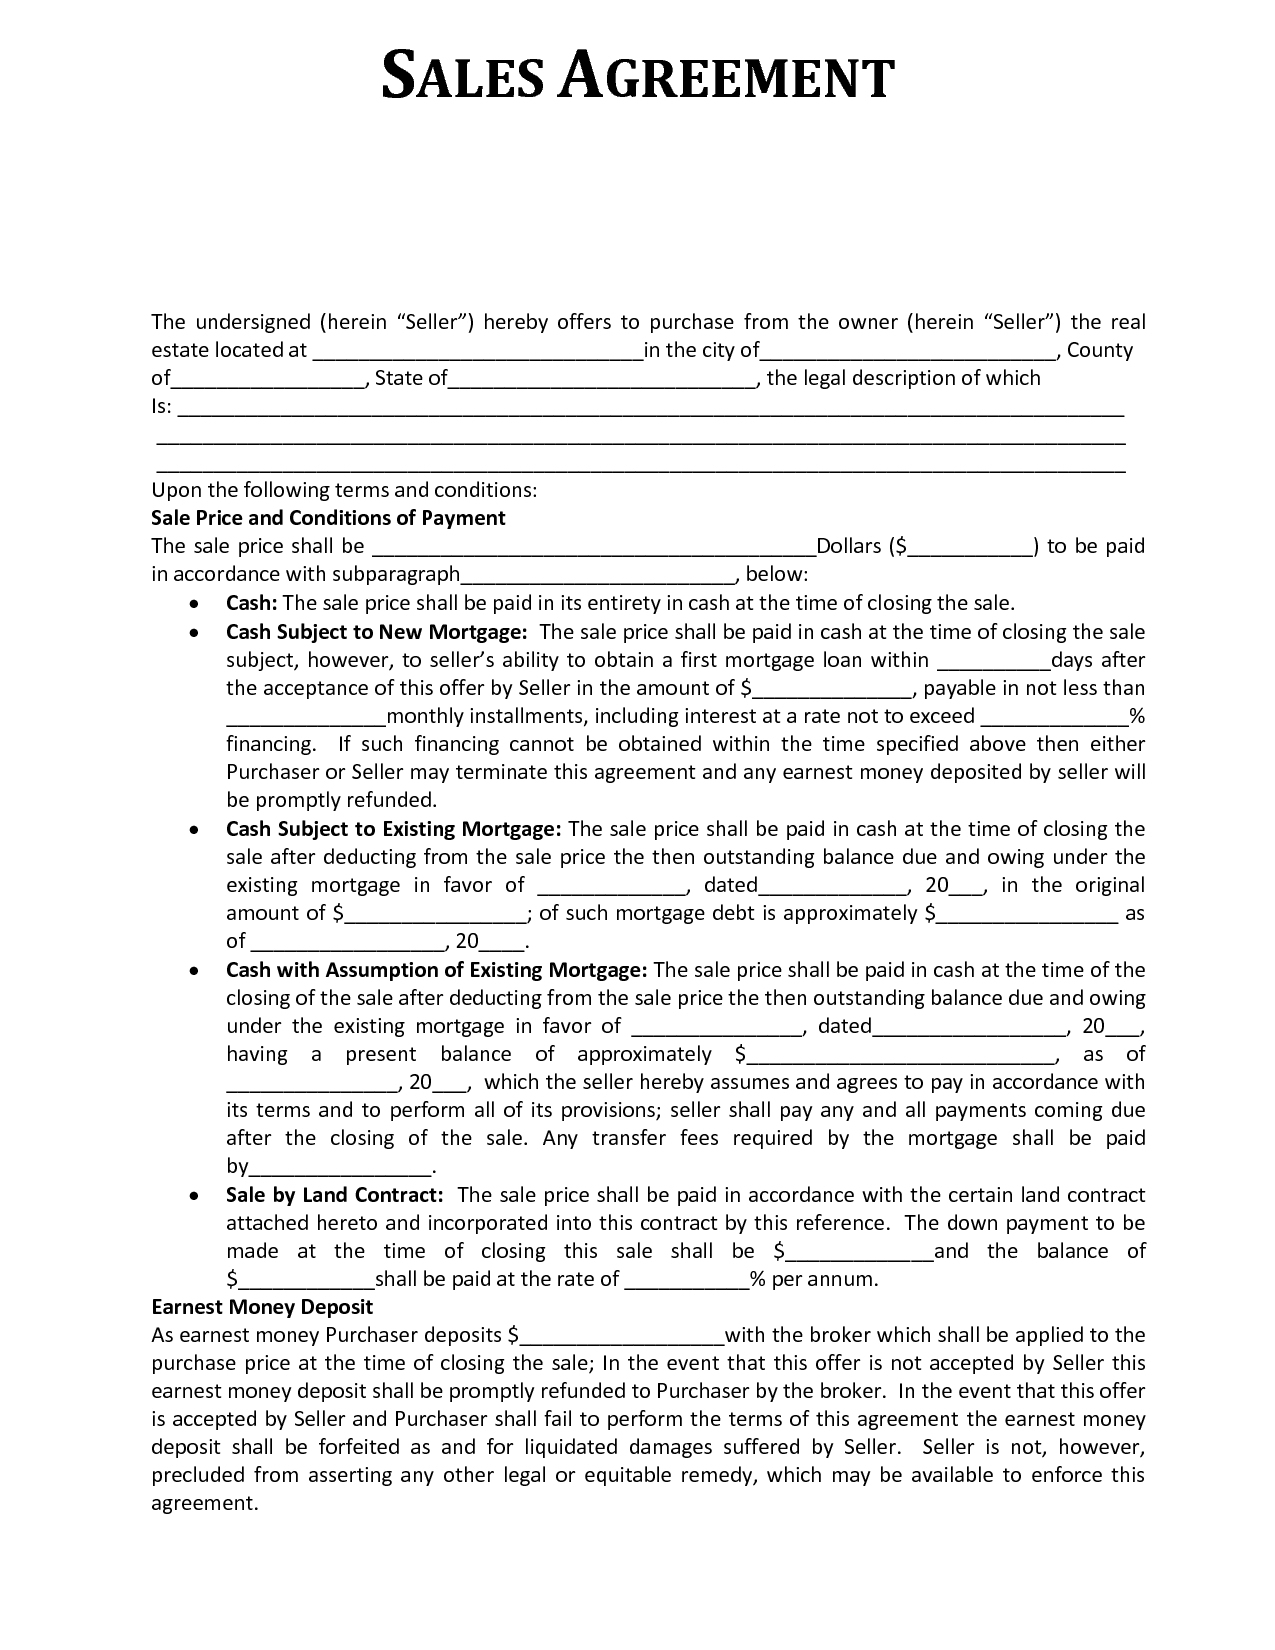 32+ Creative Image Of Sales Representative Agreement - Letterify with regard to Amazing Sales Rep Employment Contract Template